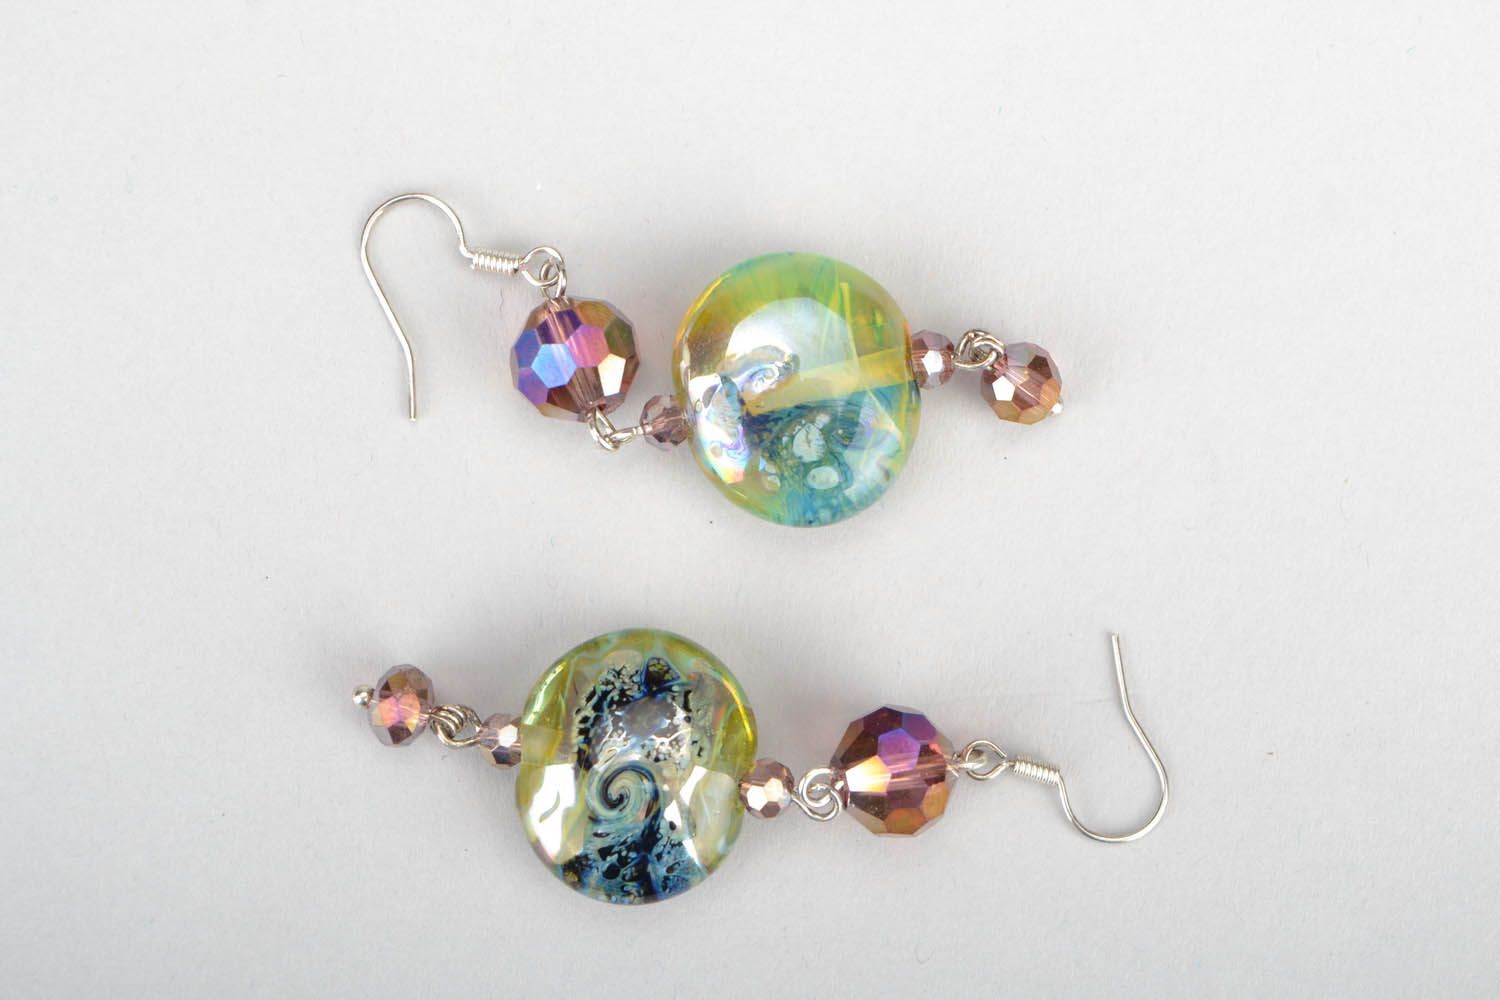 Glass earrings made using lampwork technique photo 3